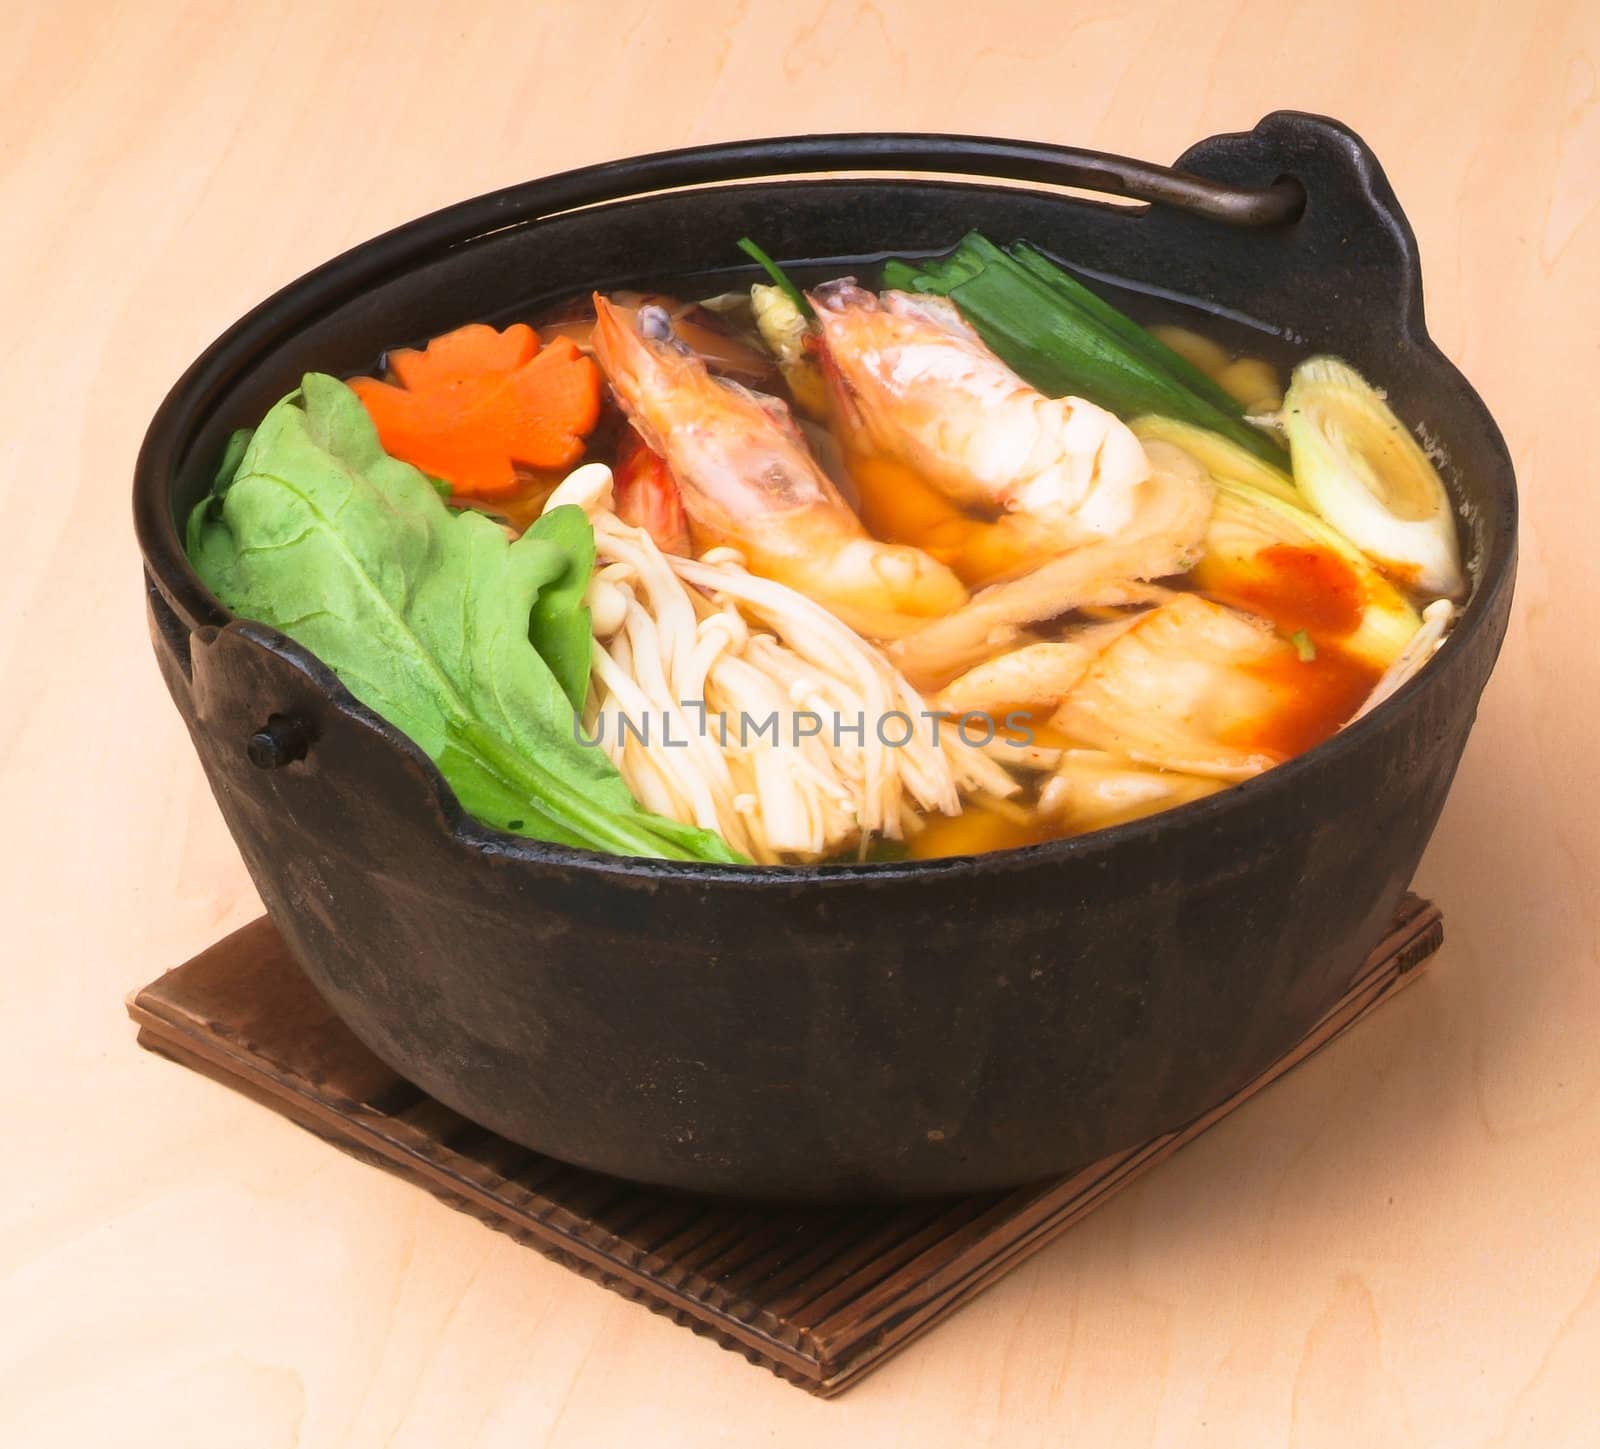 japanese seafood soup, asian cuisine. by heinteh